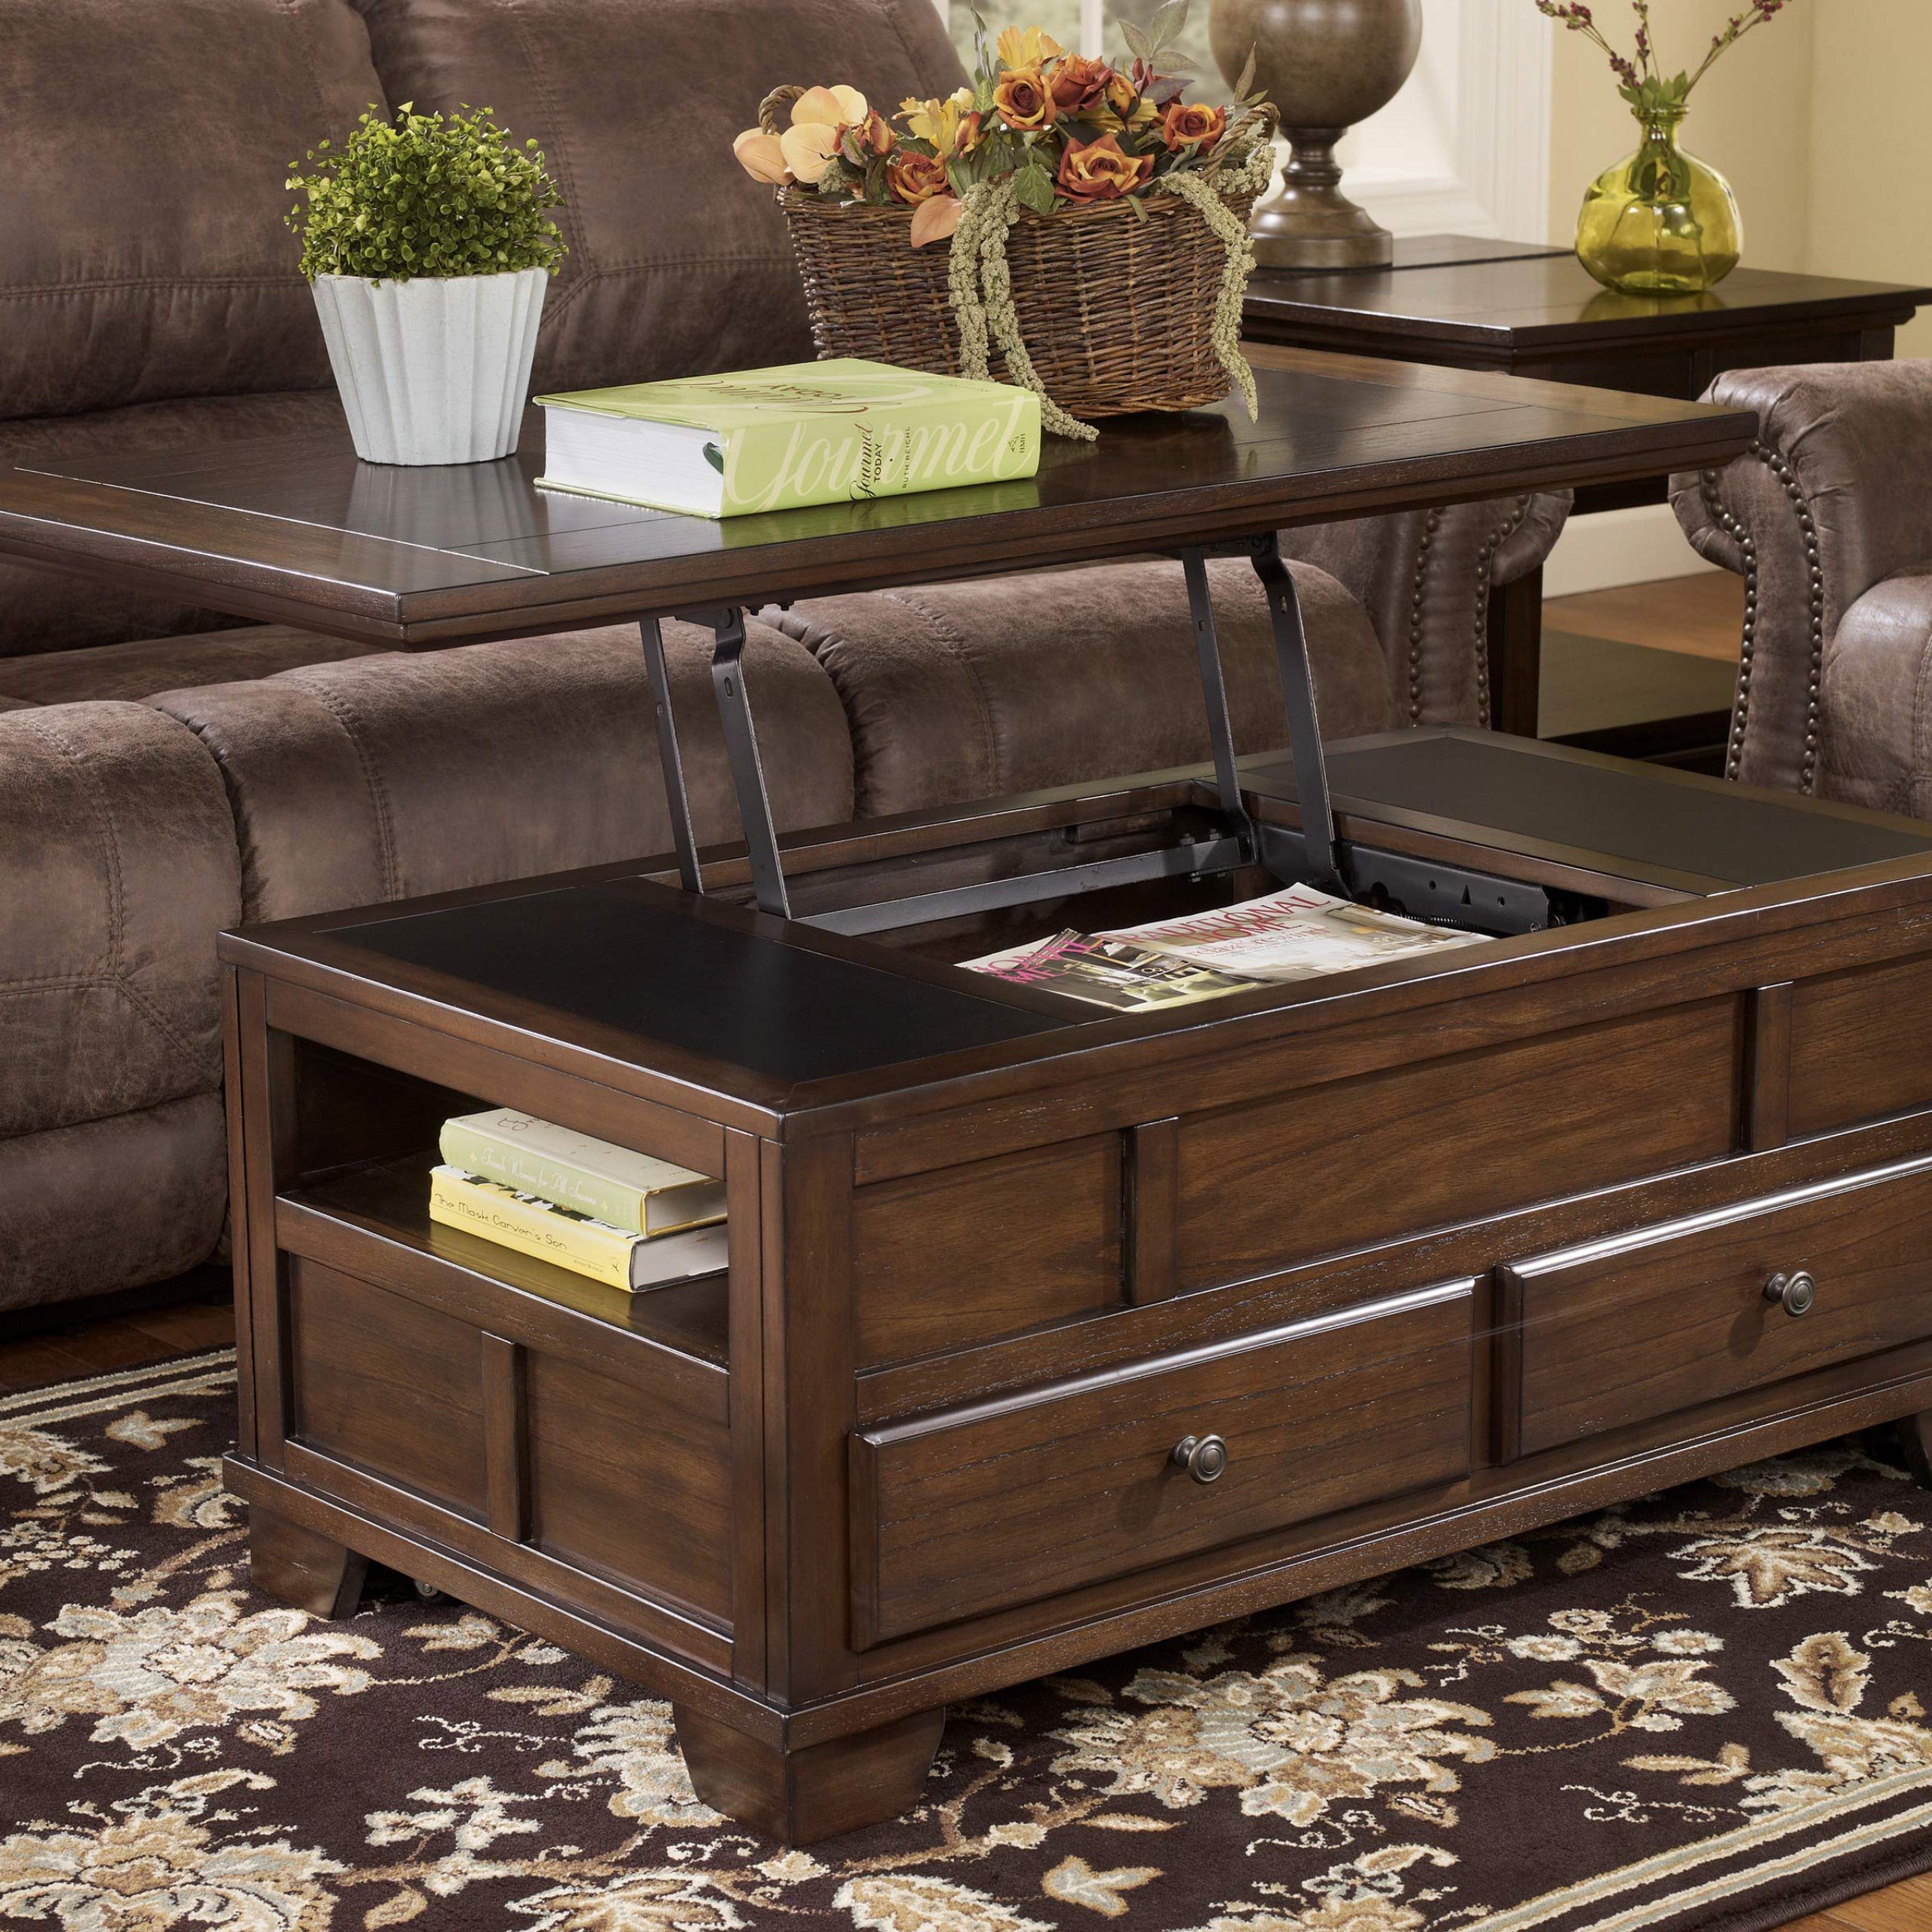 Most Recently Released Lift Top Coffee Tables With Storage Pertaining To Lift Top Coffee Tables With Storage (View 5 of 15)